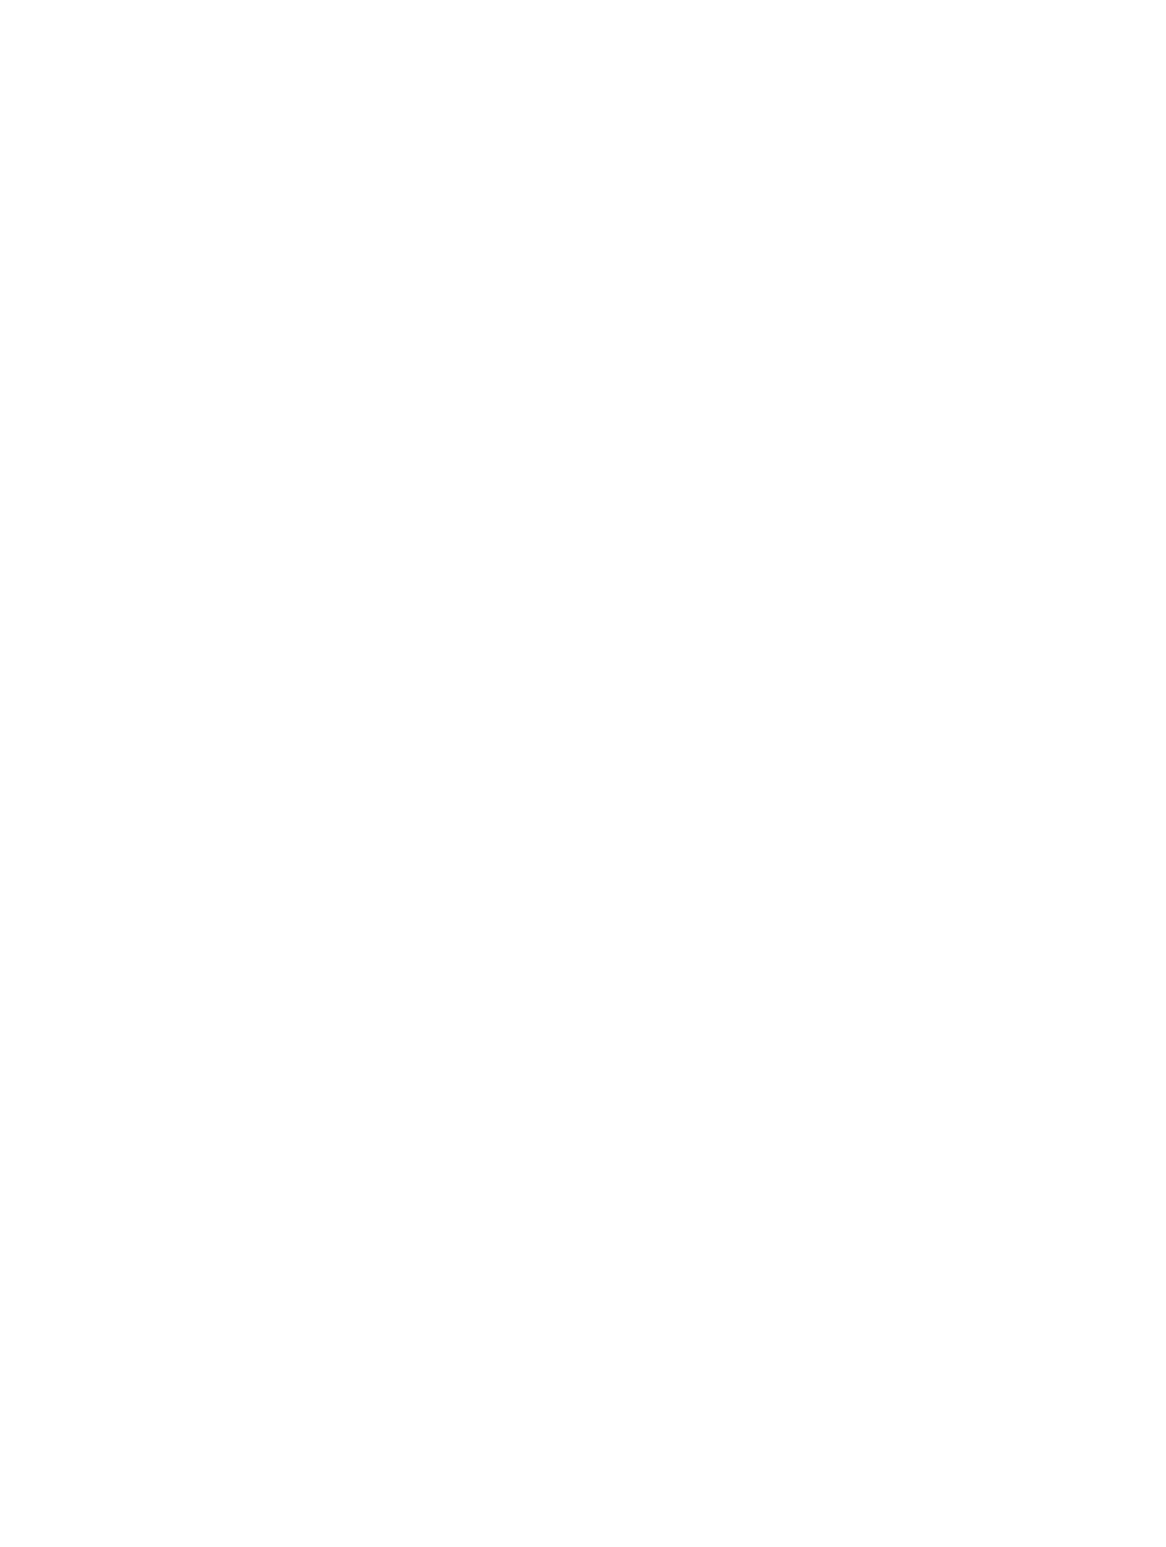 Crompton Greaves Consumer Electricals logo for dark backgrounds (transparent PNG)